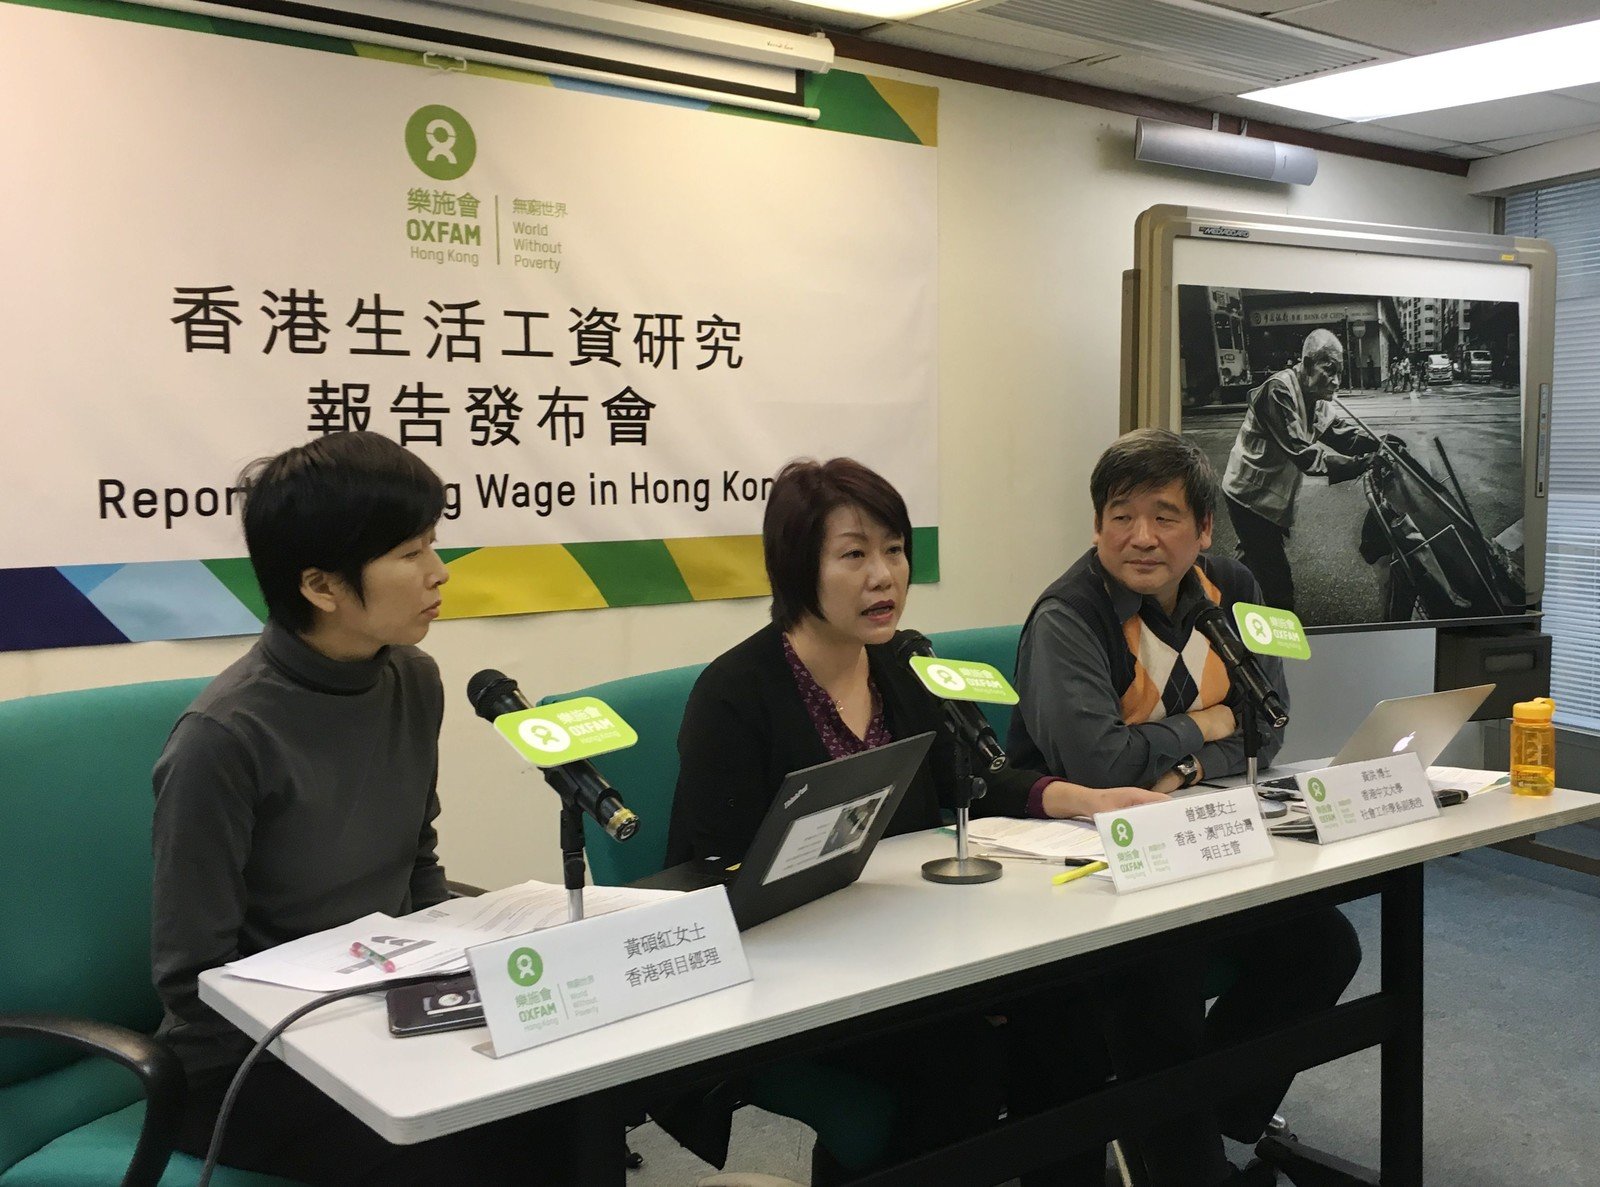 Oxfam announced its latest report on the living wage. Kalina Tsang, Head of Oxfam’s Hong Kong, Macau, Taiwan Programme, urged the government – which employs the largest number of outsourced low-income workers – to take the lead in paying a living wage.